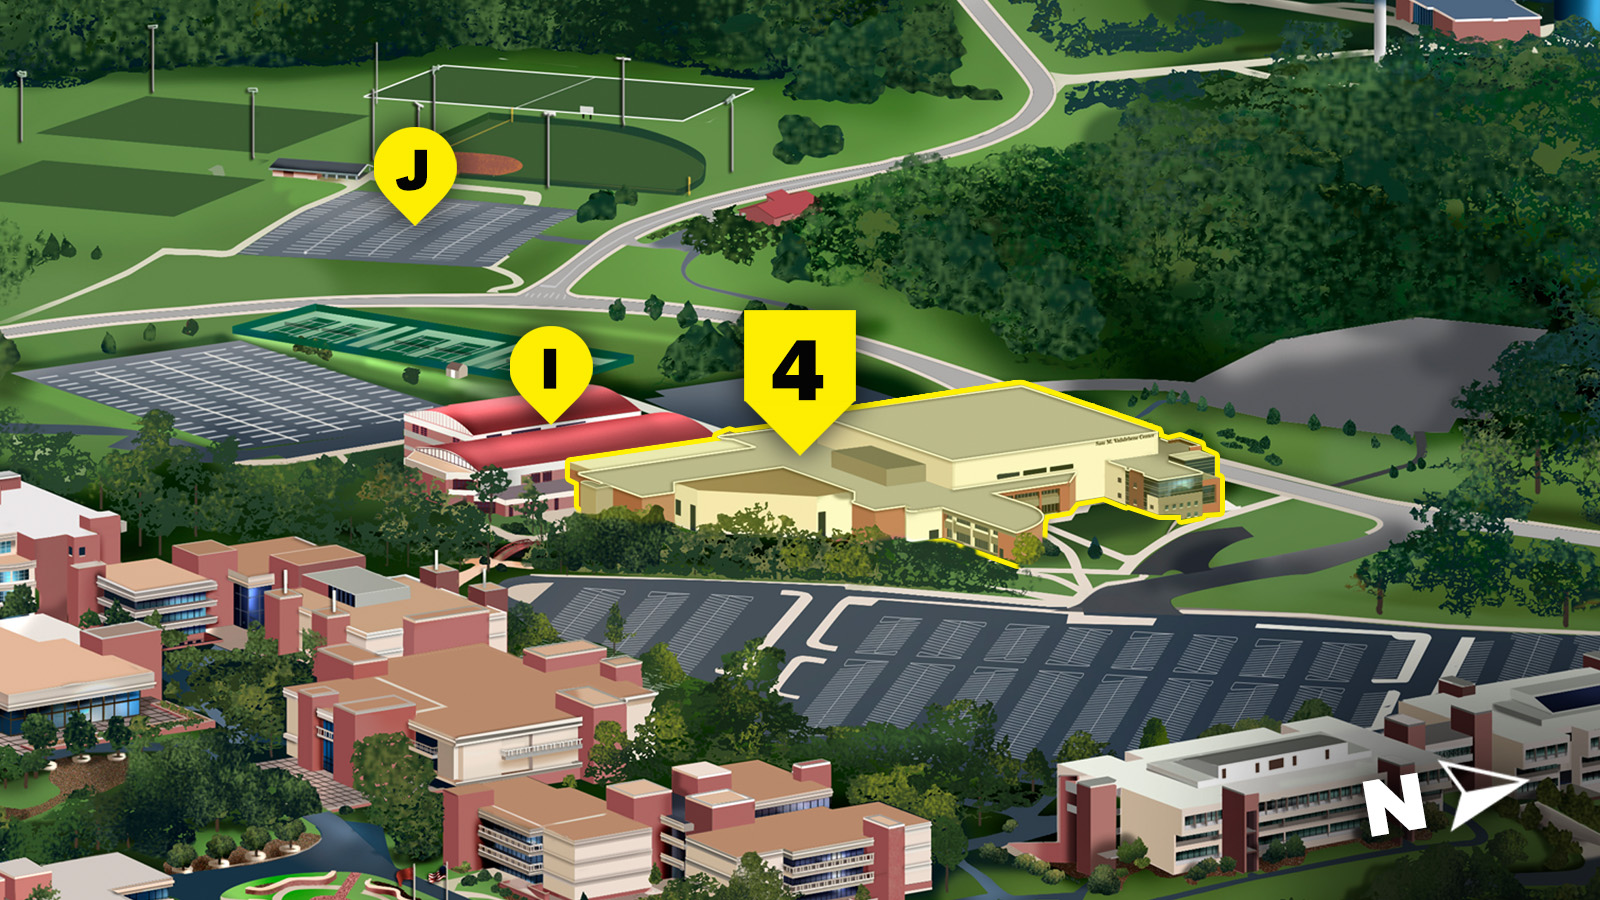 campus map highlight areas near lovejoy library